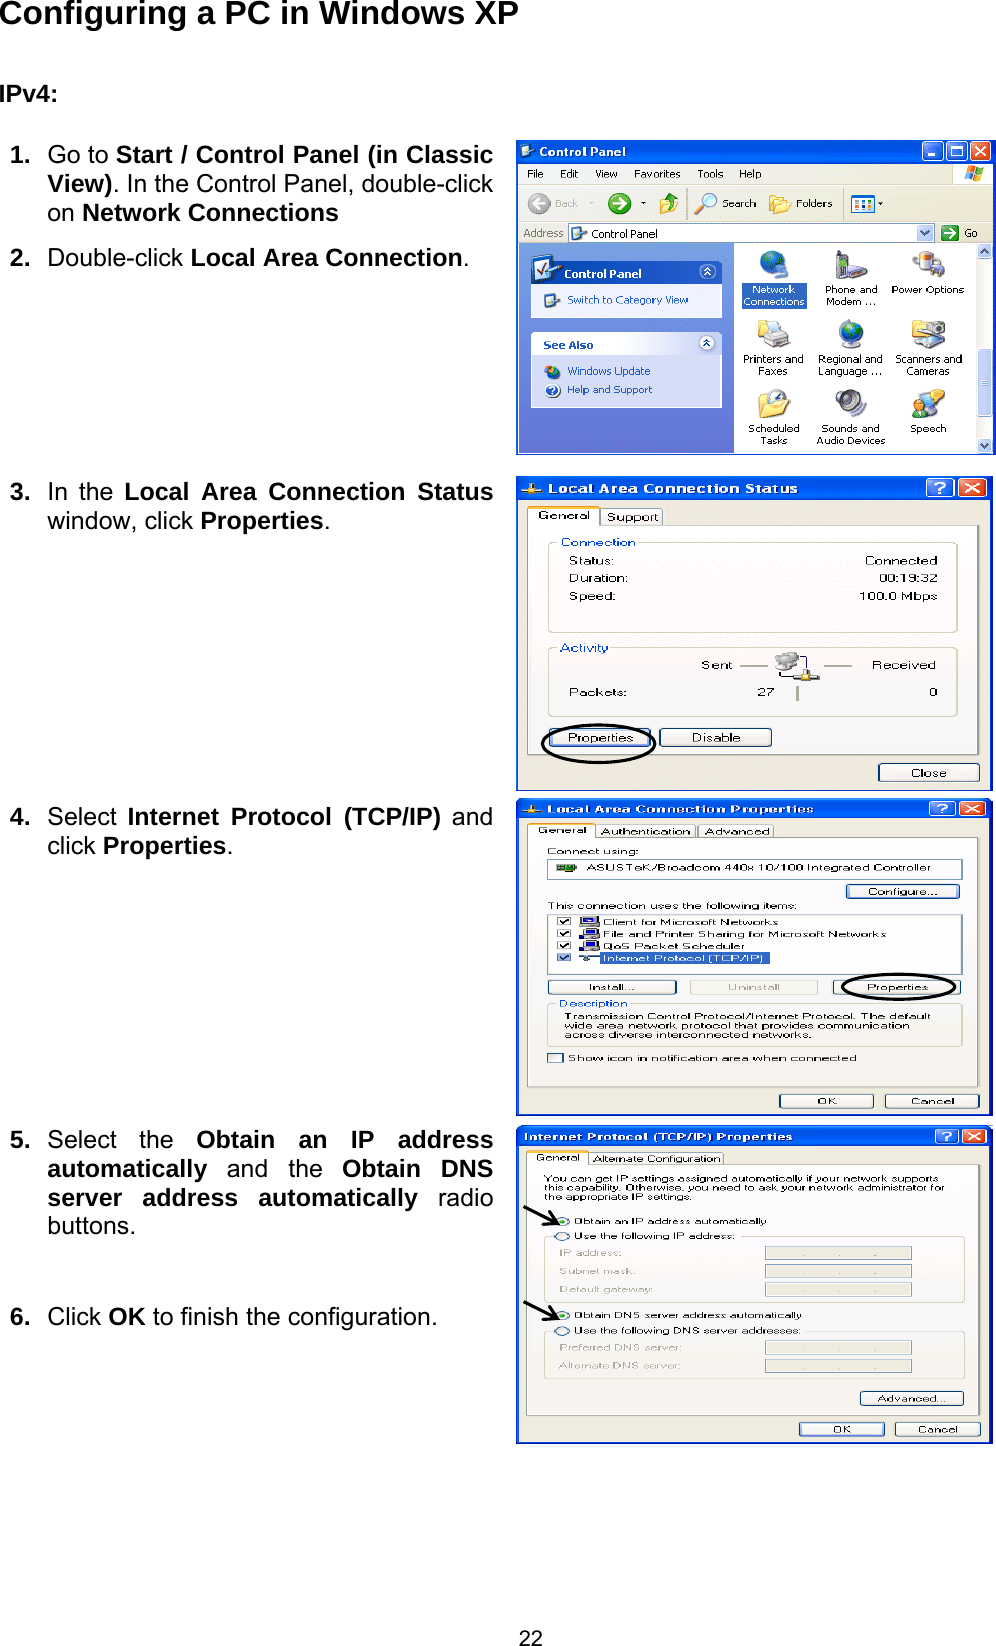  22 Configuring a PC in Windows XP     IPv4:  1.  Go to Start / Control Panel (in Classic View). In the Control Panel, double-click on Network Connections 2.  Double-click Local Area Connection.  3.  In the Local Area Connection Status window, click Properties. 4.  Select  Internet Protocol (TCP/IP) and click Properties.  5.  Select the Obtain an IP address automatically  and the  Obtain DNS server address automatically radio buttons.  6.  Click OK to finish the configuration.       